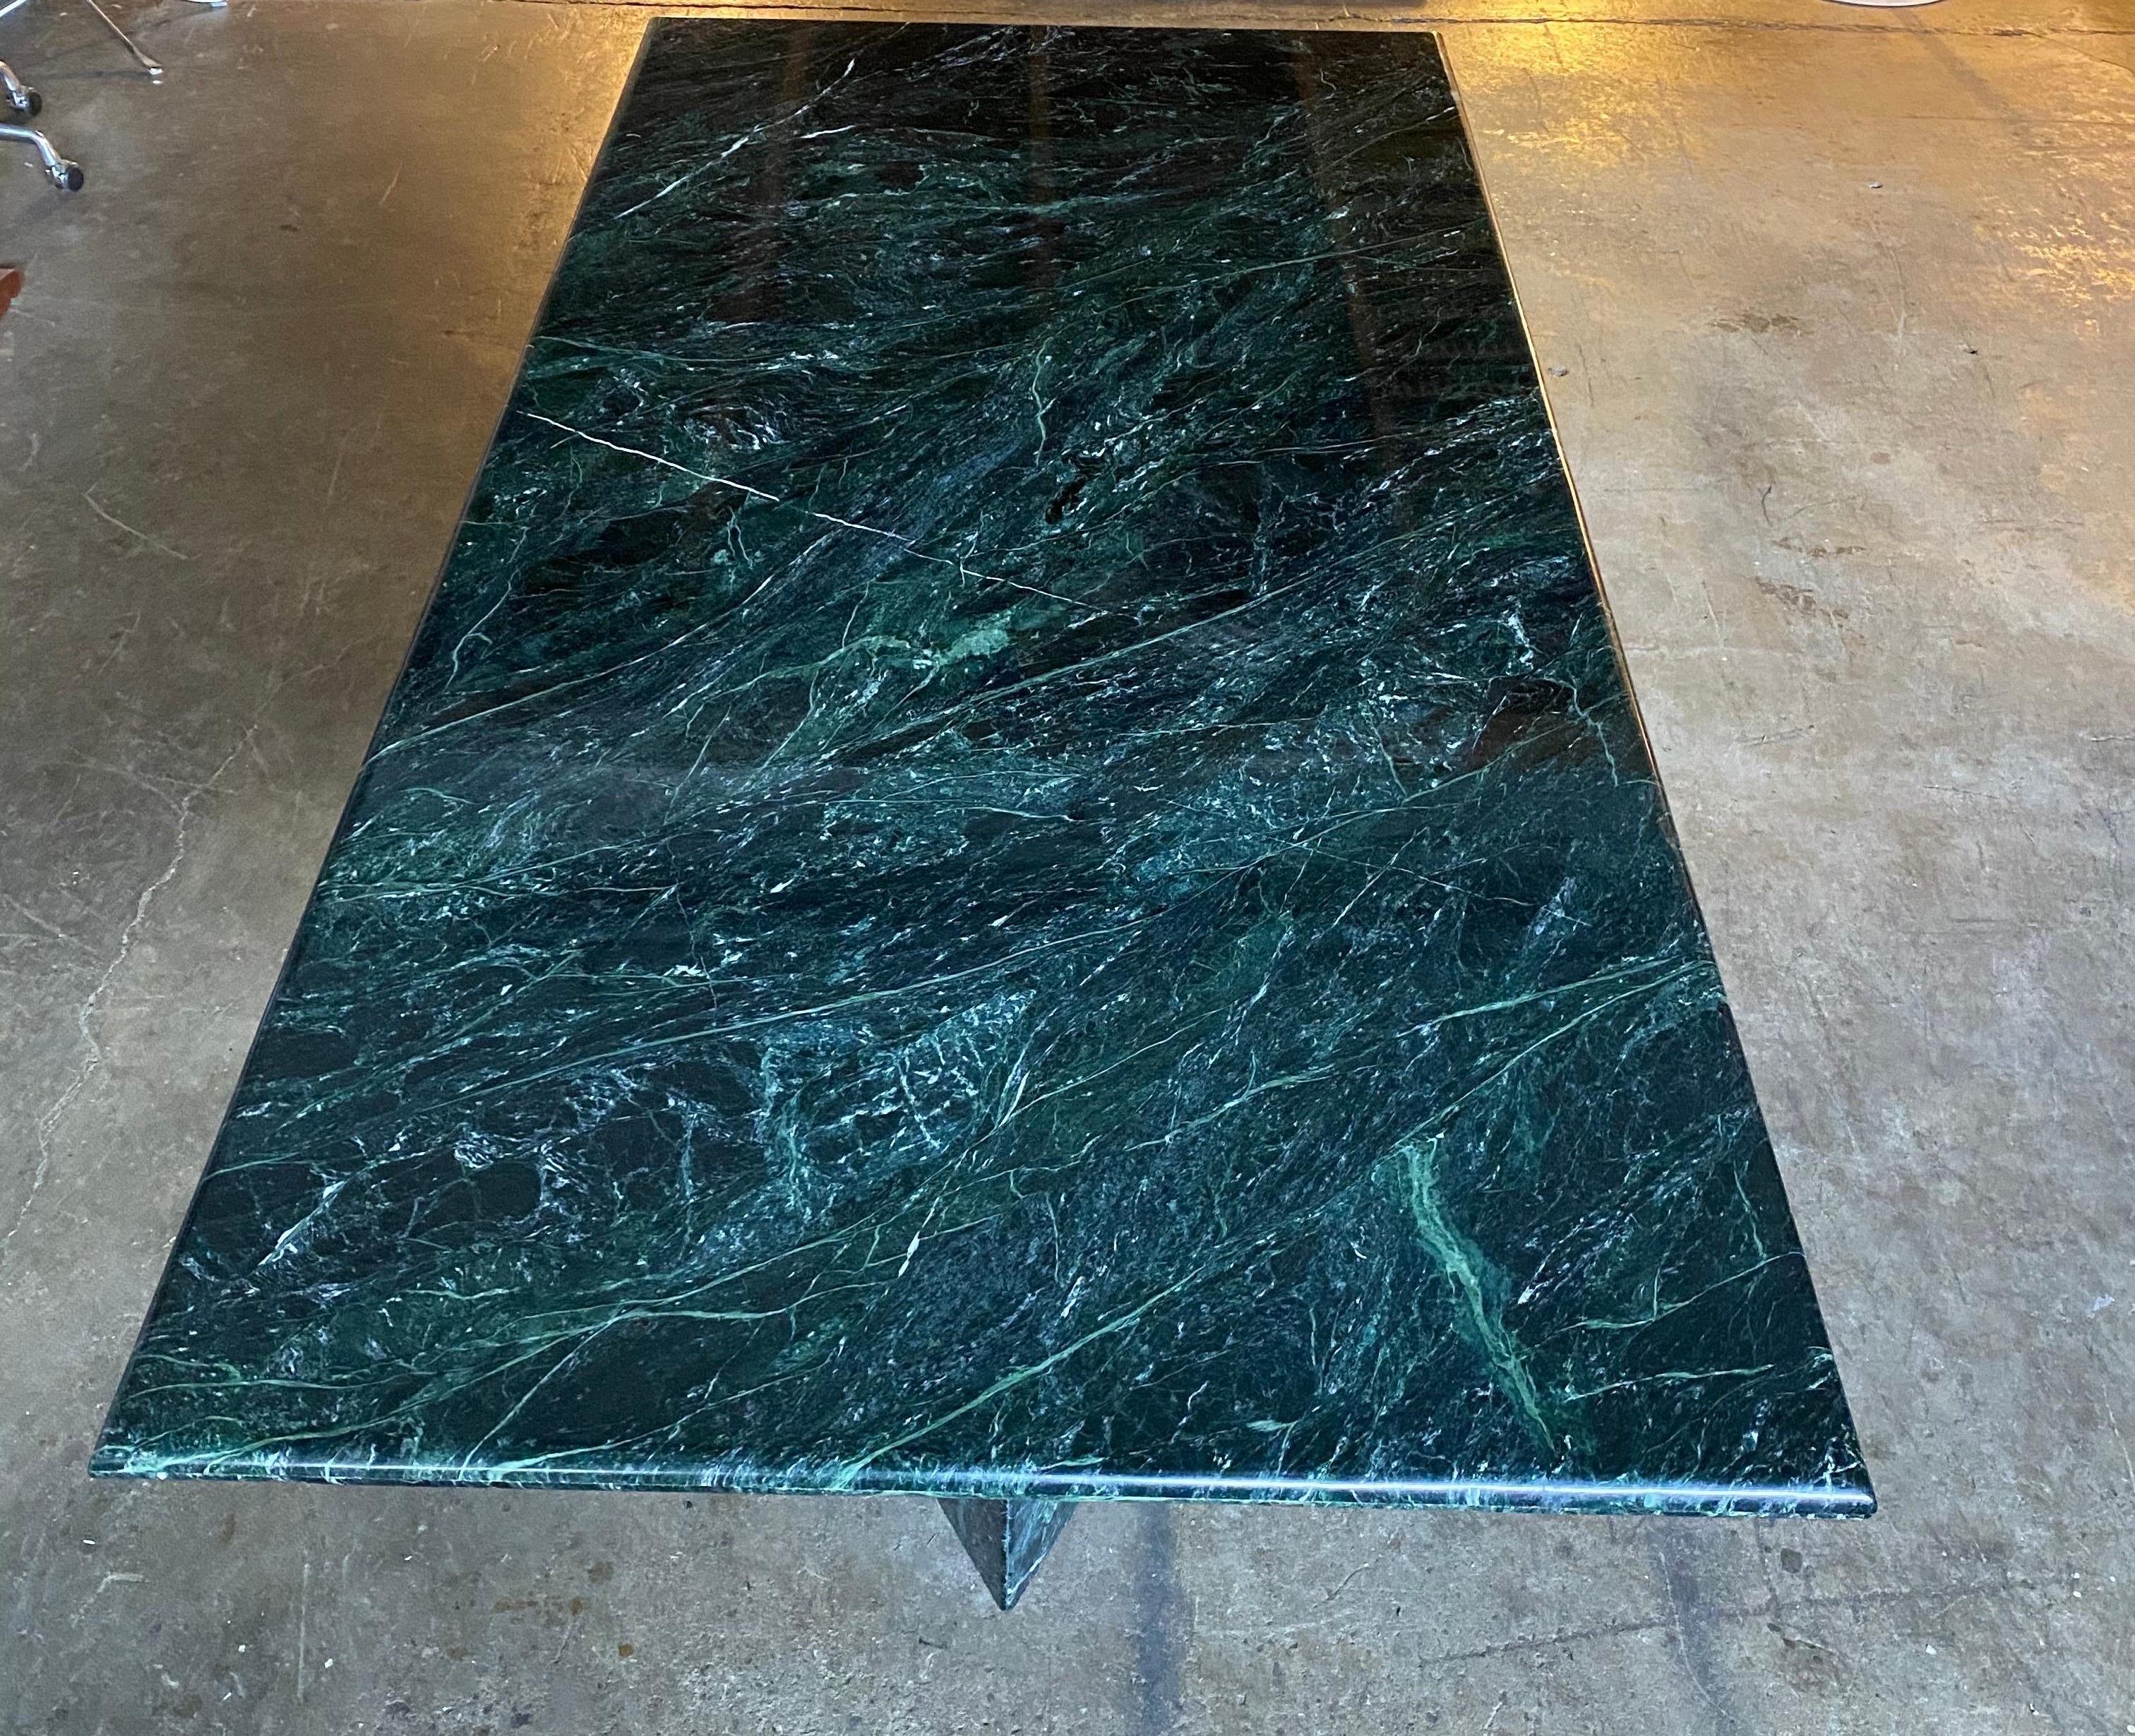 Incredible dining table in green marble. Rectangular shape allows for 10 dining chairs. Bullnose edge softens the sides and creates a stunning effect. No dings or fading. Marble in good condition. Top rests upon triangular marble pedestals of the